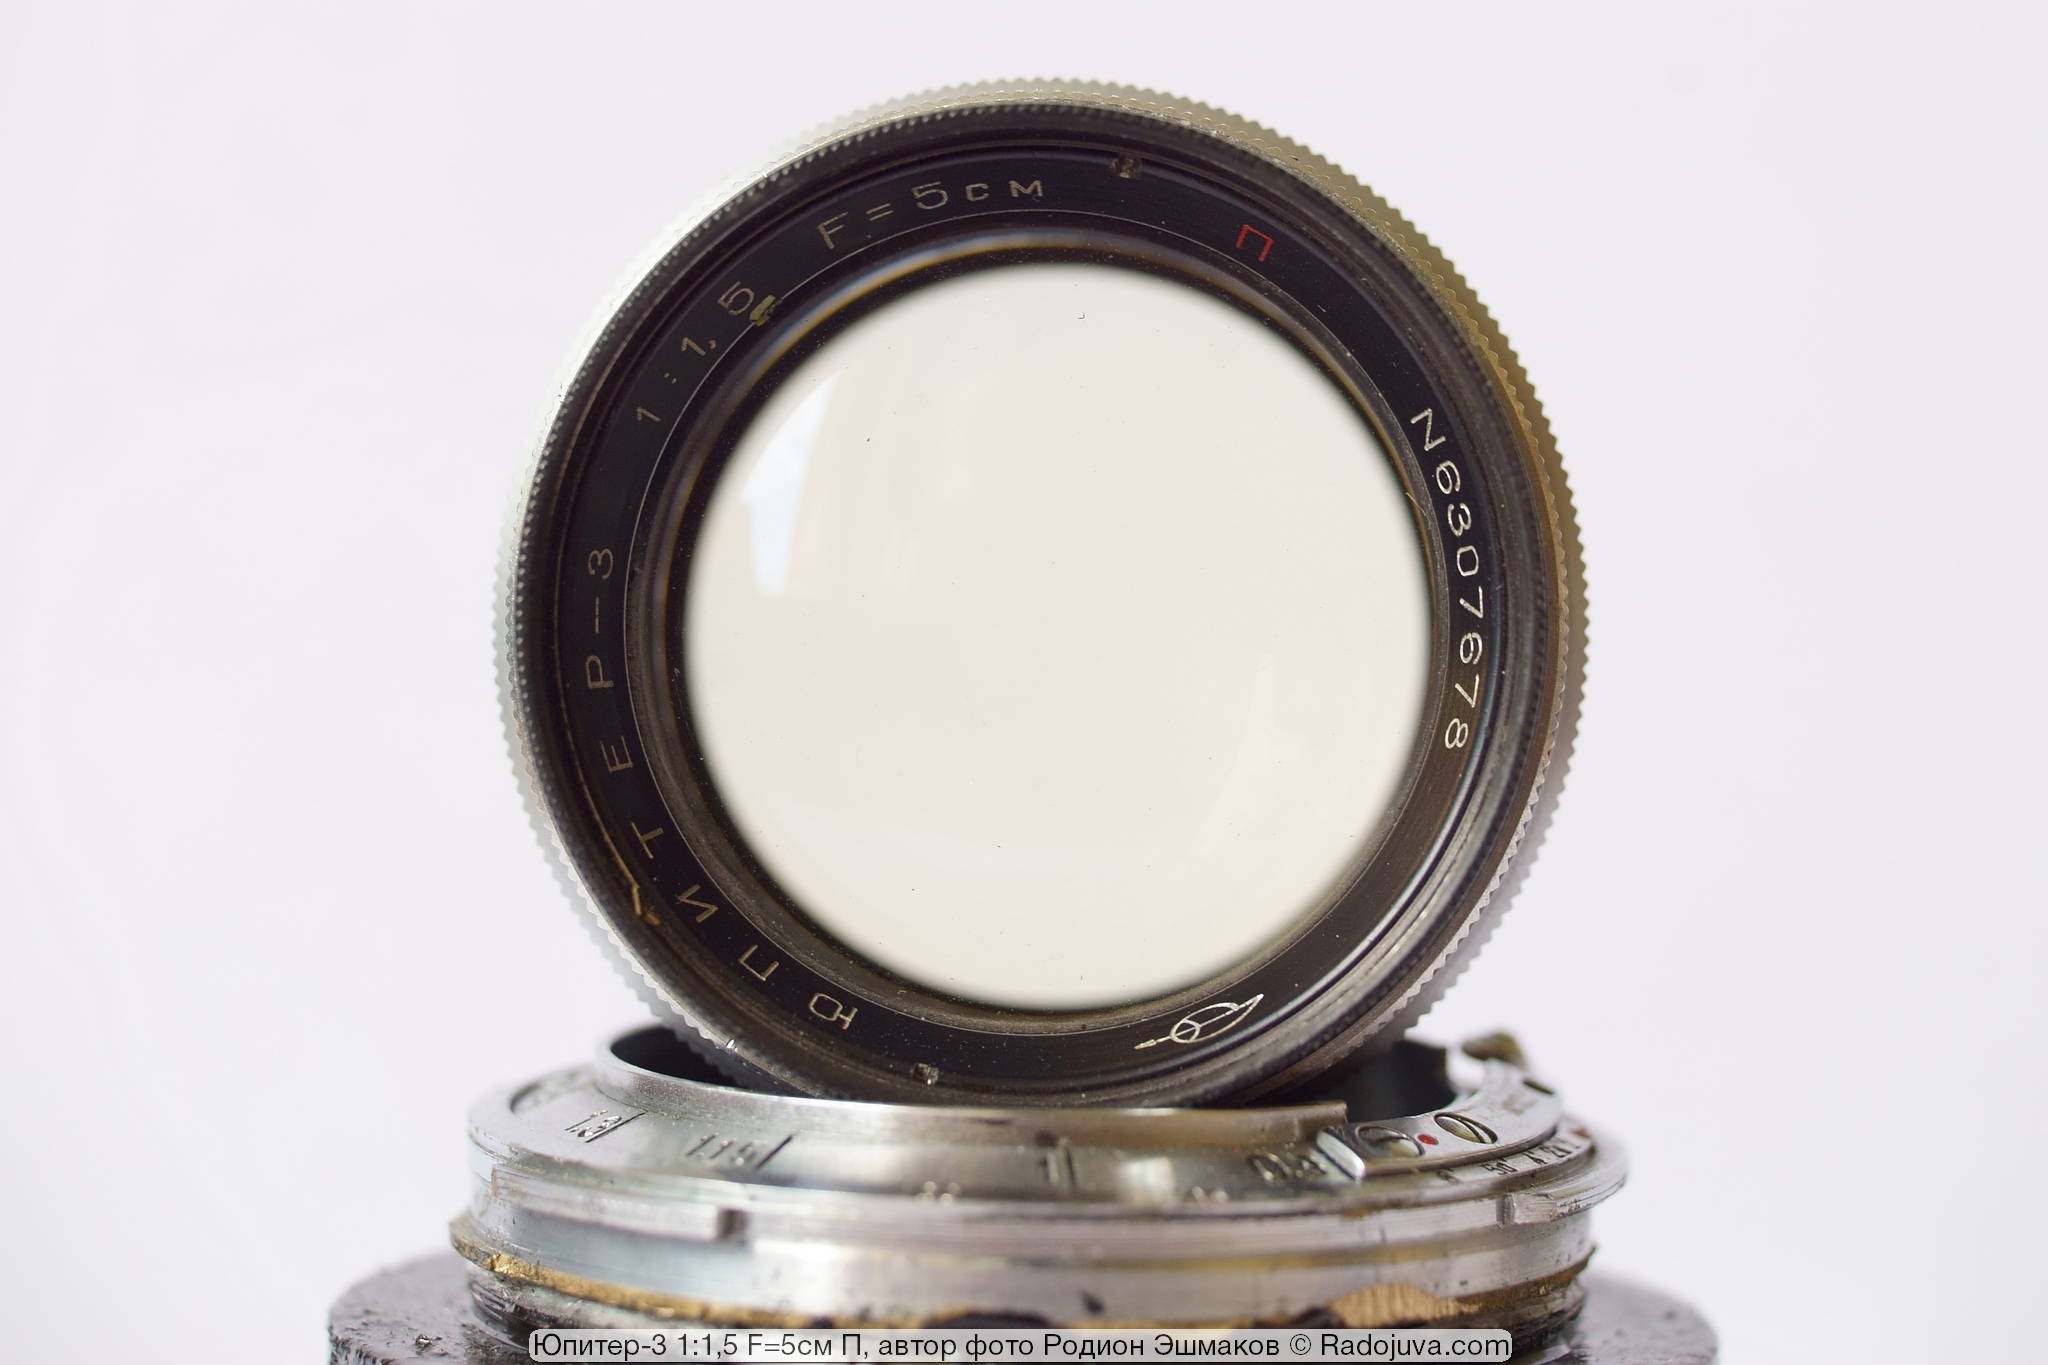 Jupiter-3 lenses often turn yellow in transmission, but versions with blue (orange in transmission) and violet (yellow-green) antireflection are especially affected.